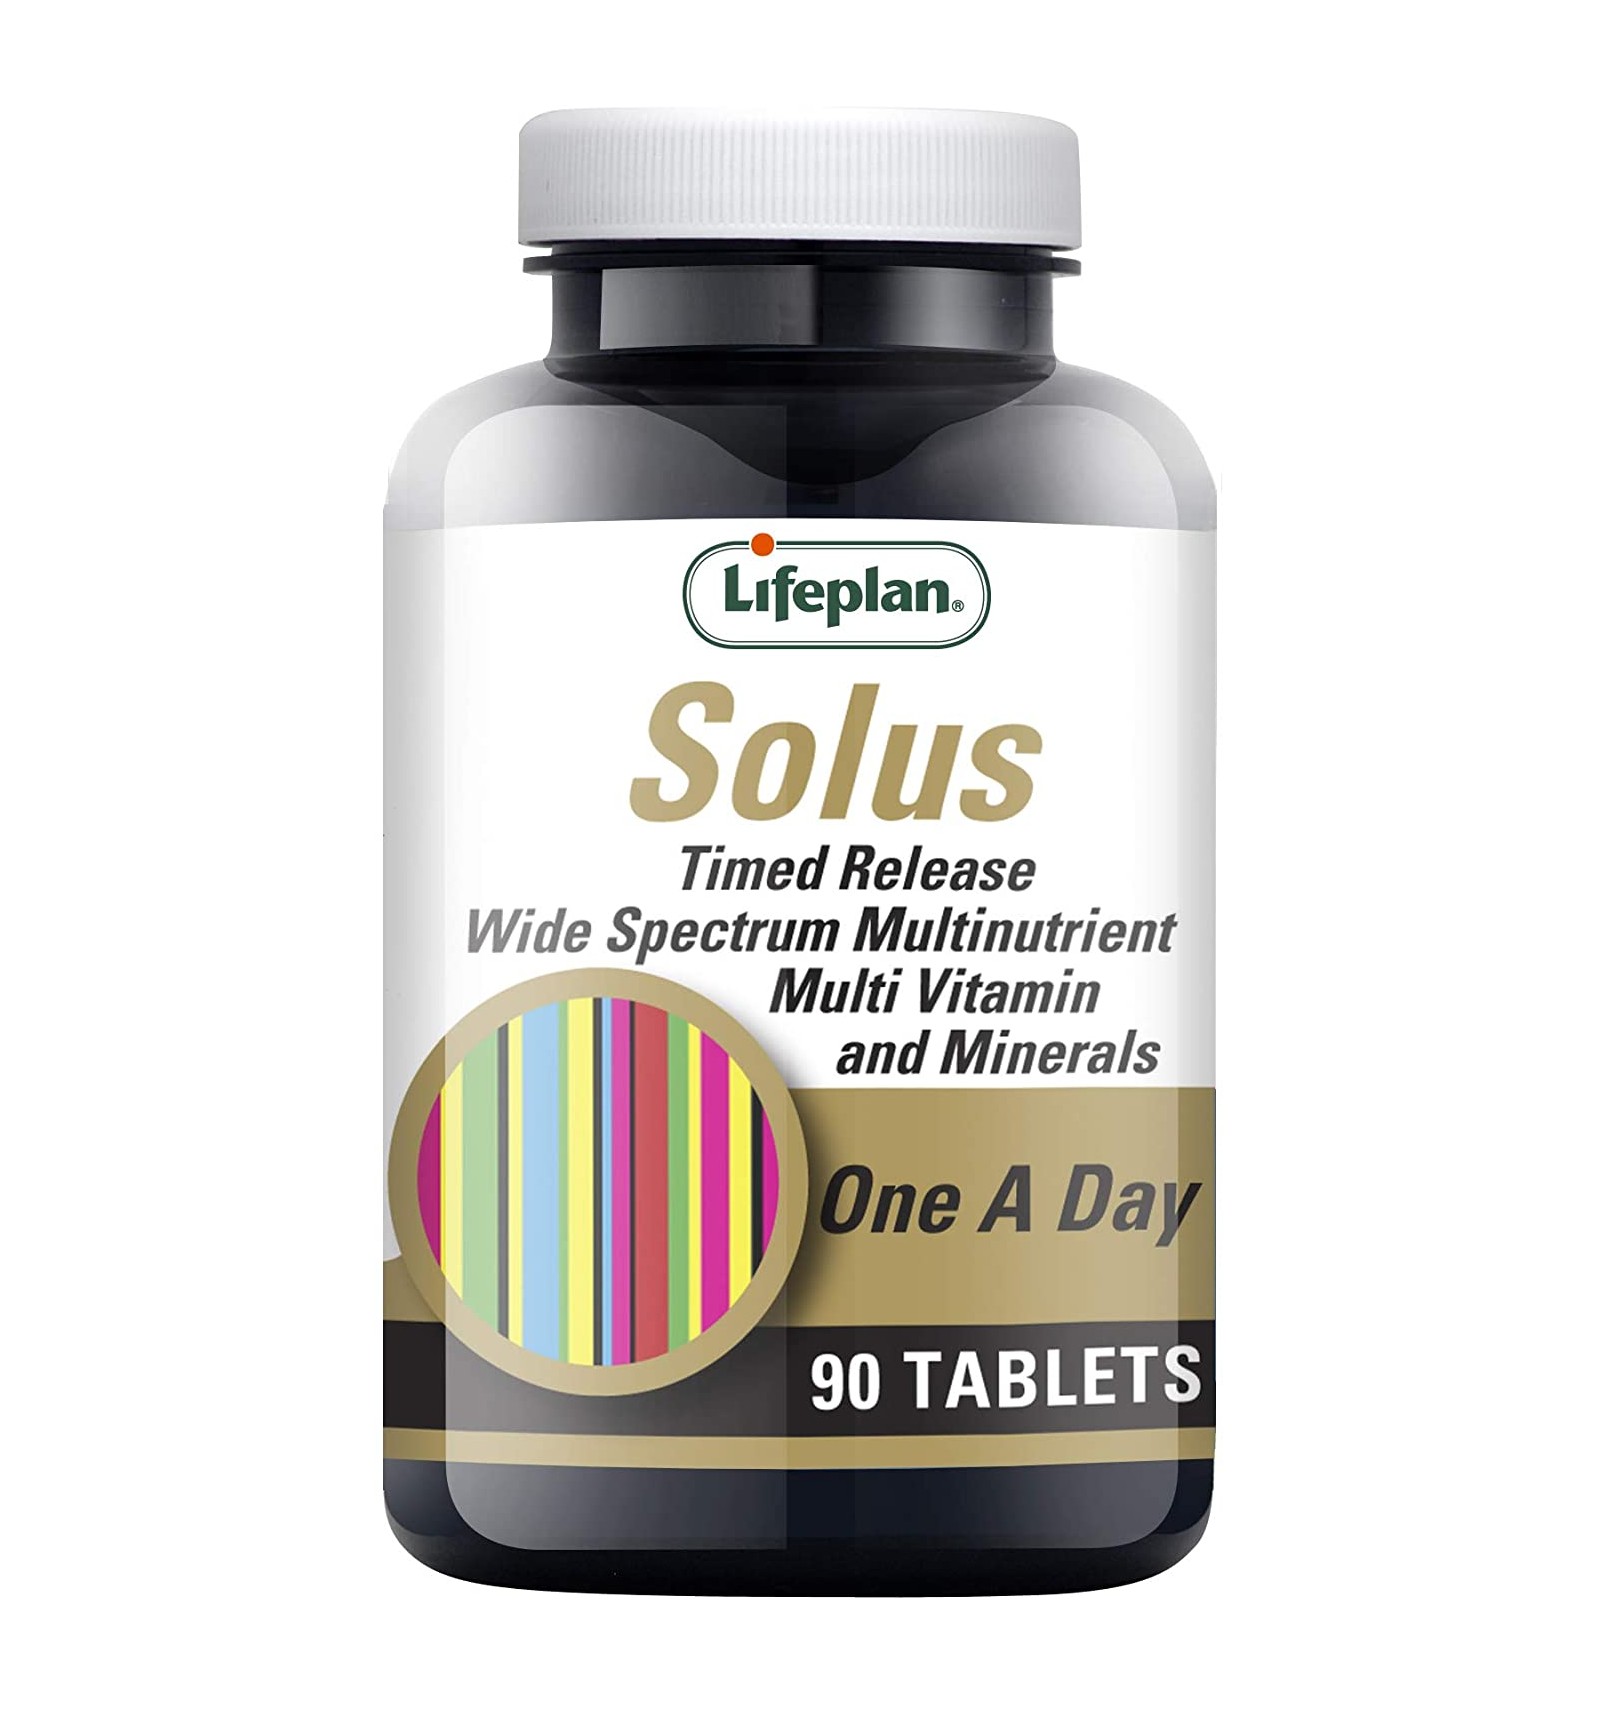 LIFEPLAN Solus Multinutrient TIMED RELEASE ONE A DAY 90TAB